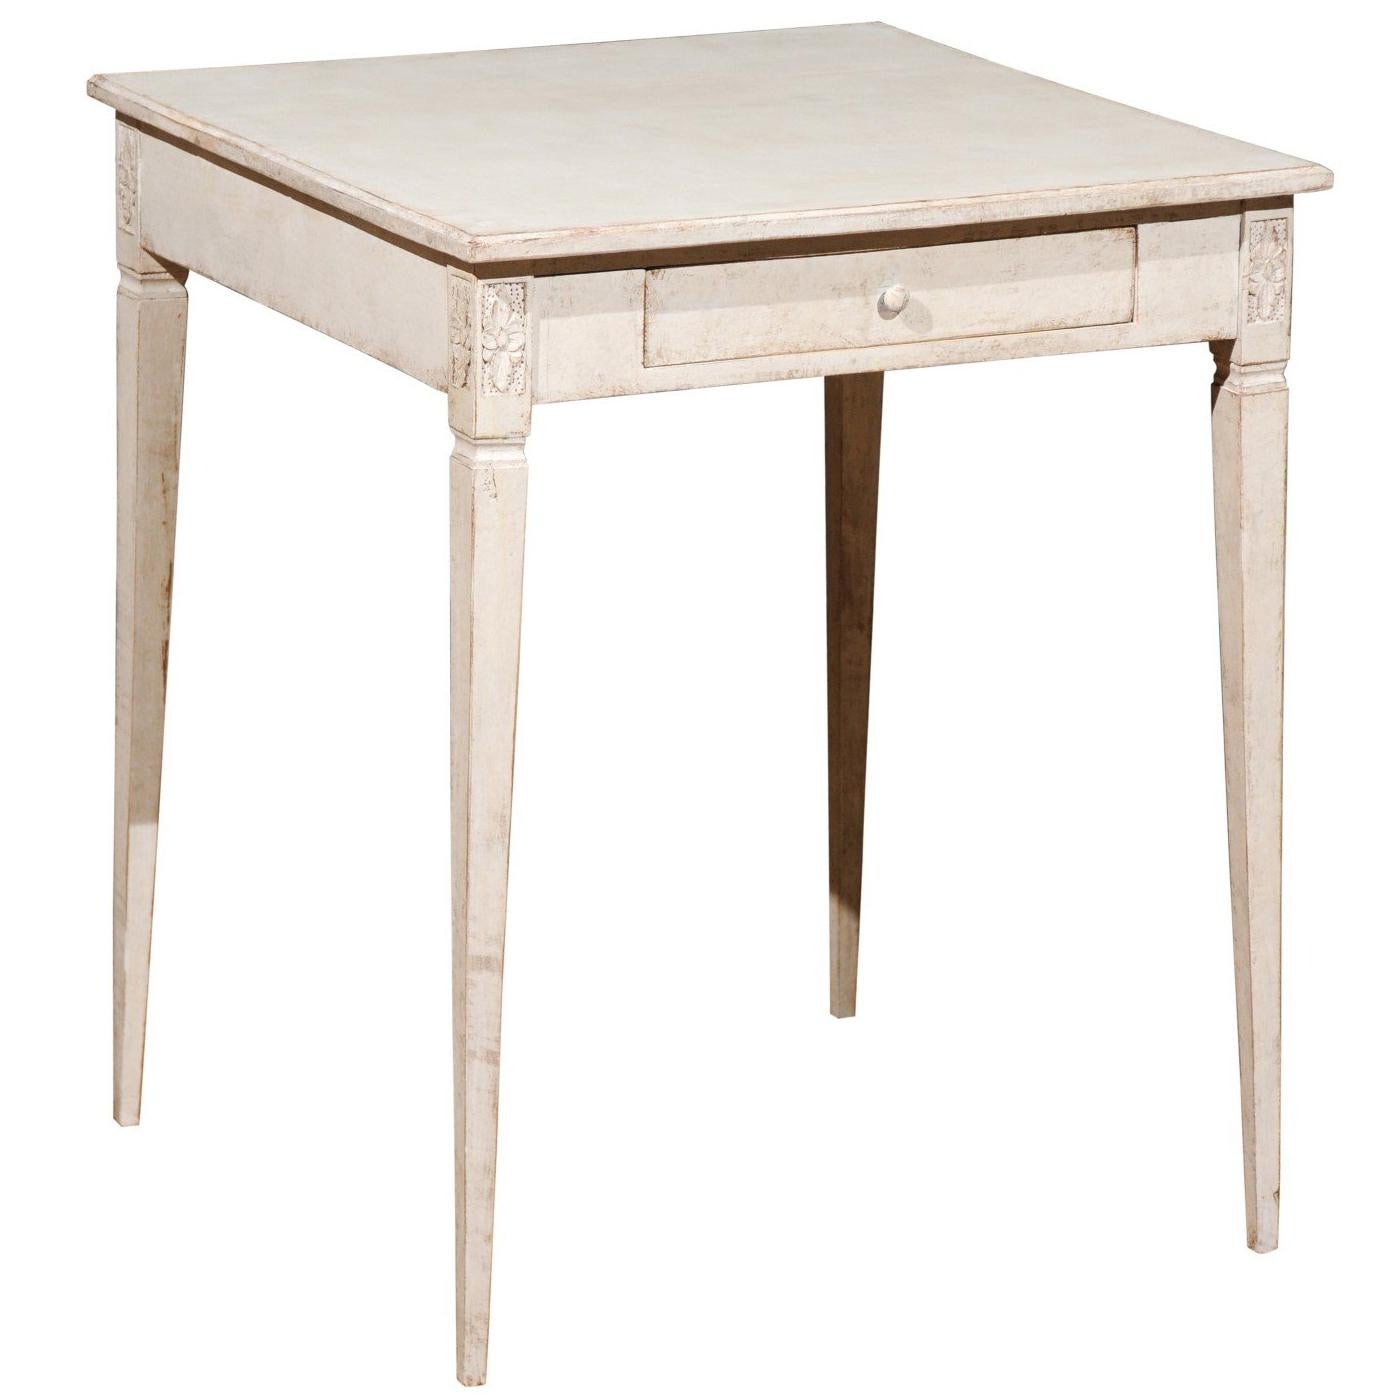 Swedish Neoclassical Style Painted Side Table with Drawer from Småland, 1880s